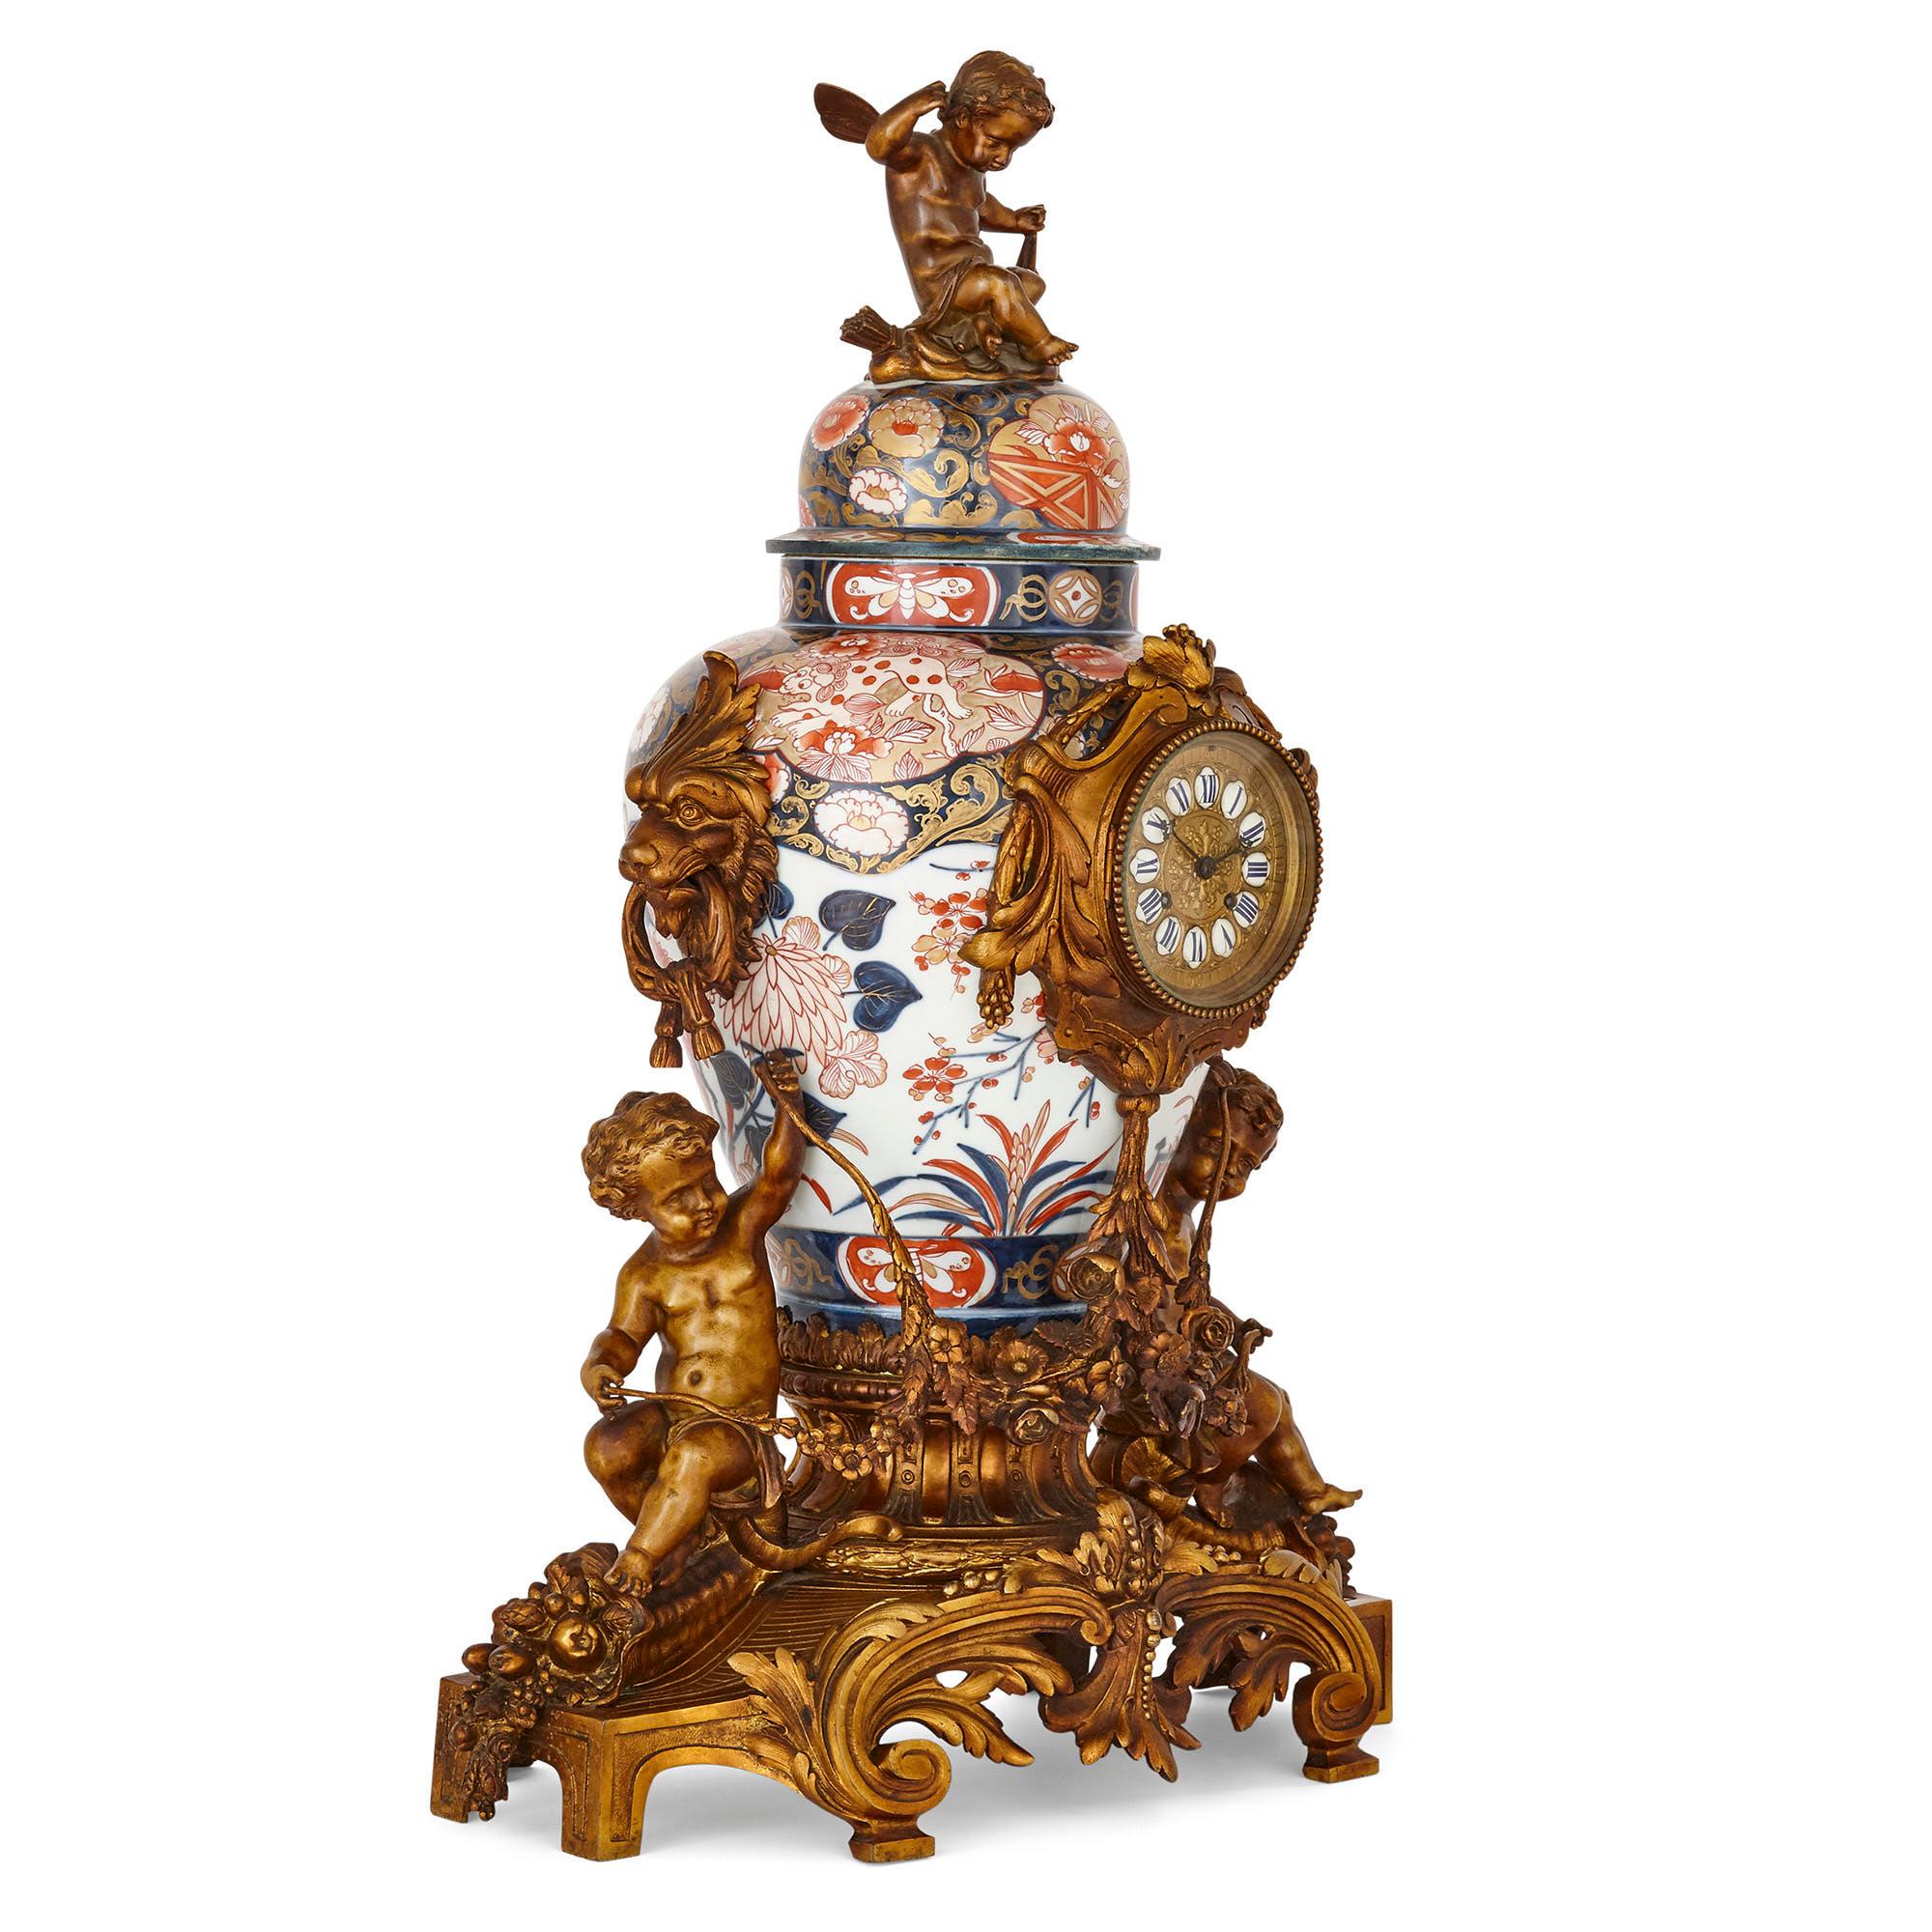 This clock set contains three pieces: namely, a mantel clock and a pair of flanking candelabra. The mantel clock is designed about a Japanese porcelain vase, known as Imari ware. This white ground vase, painted in reds and blues and ornamented with